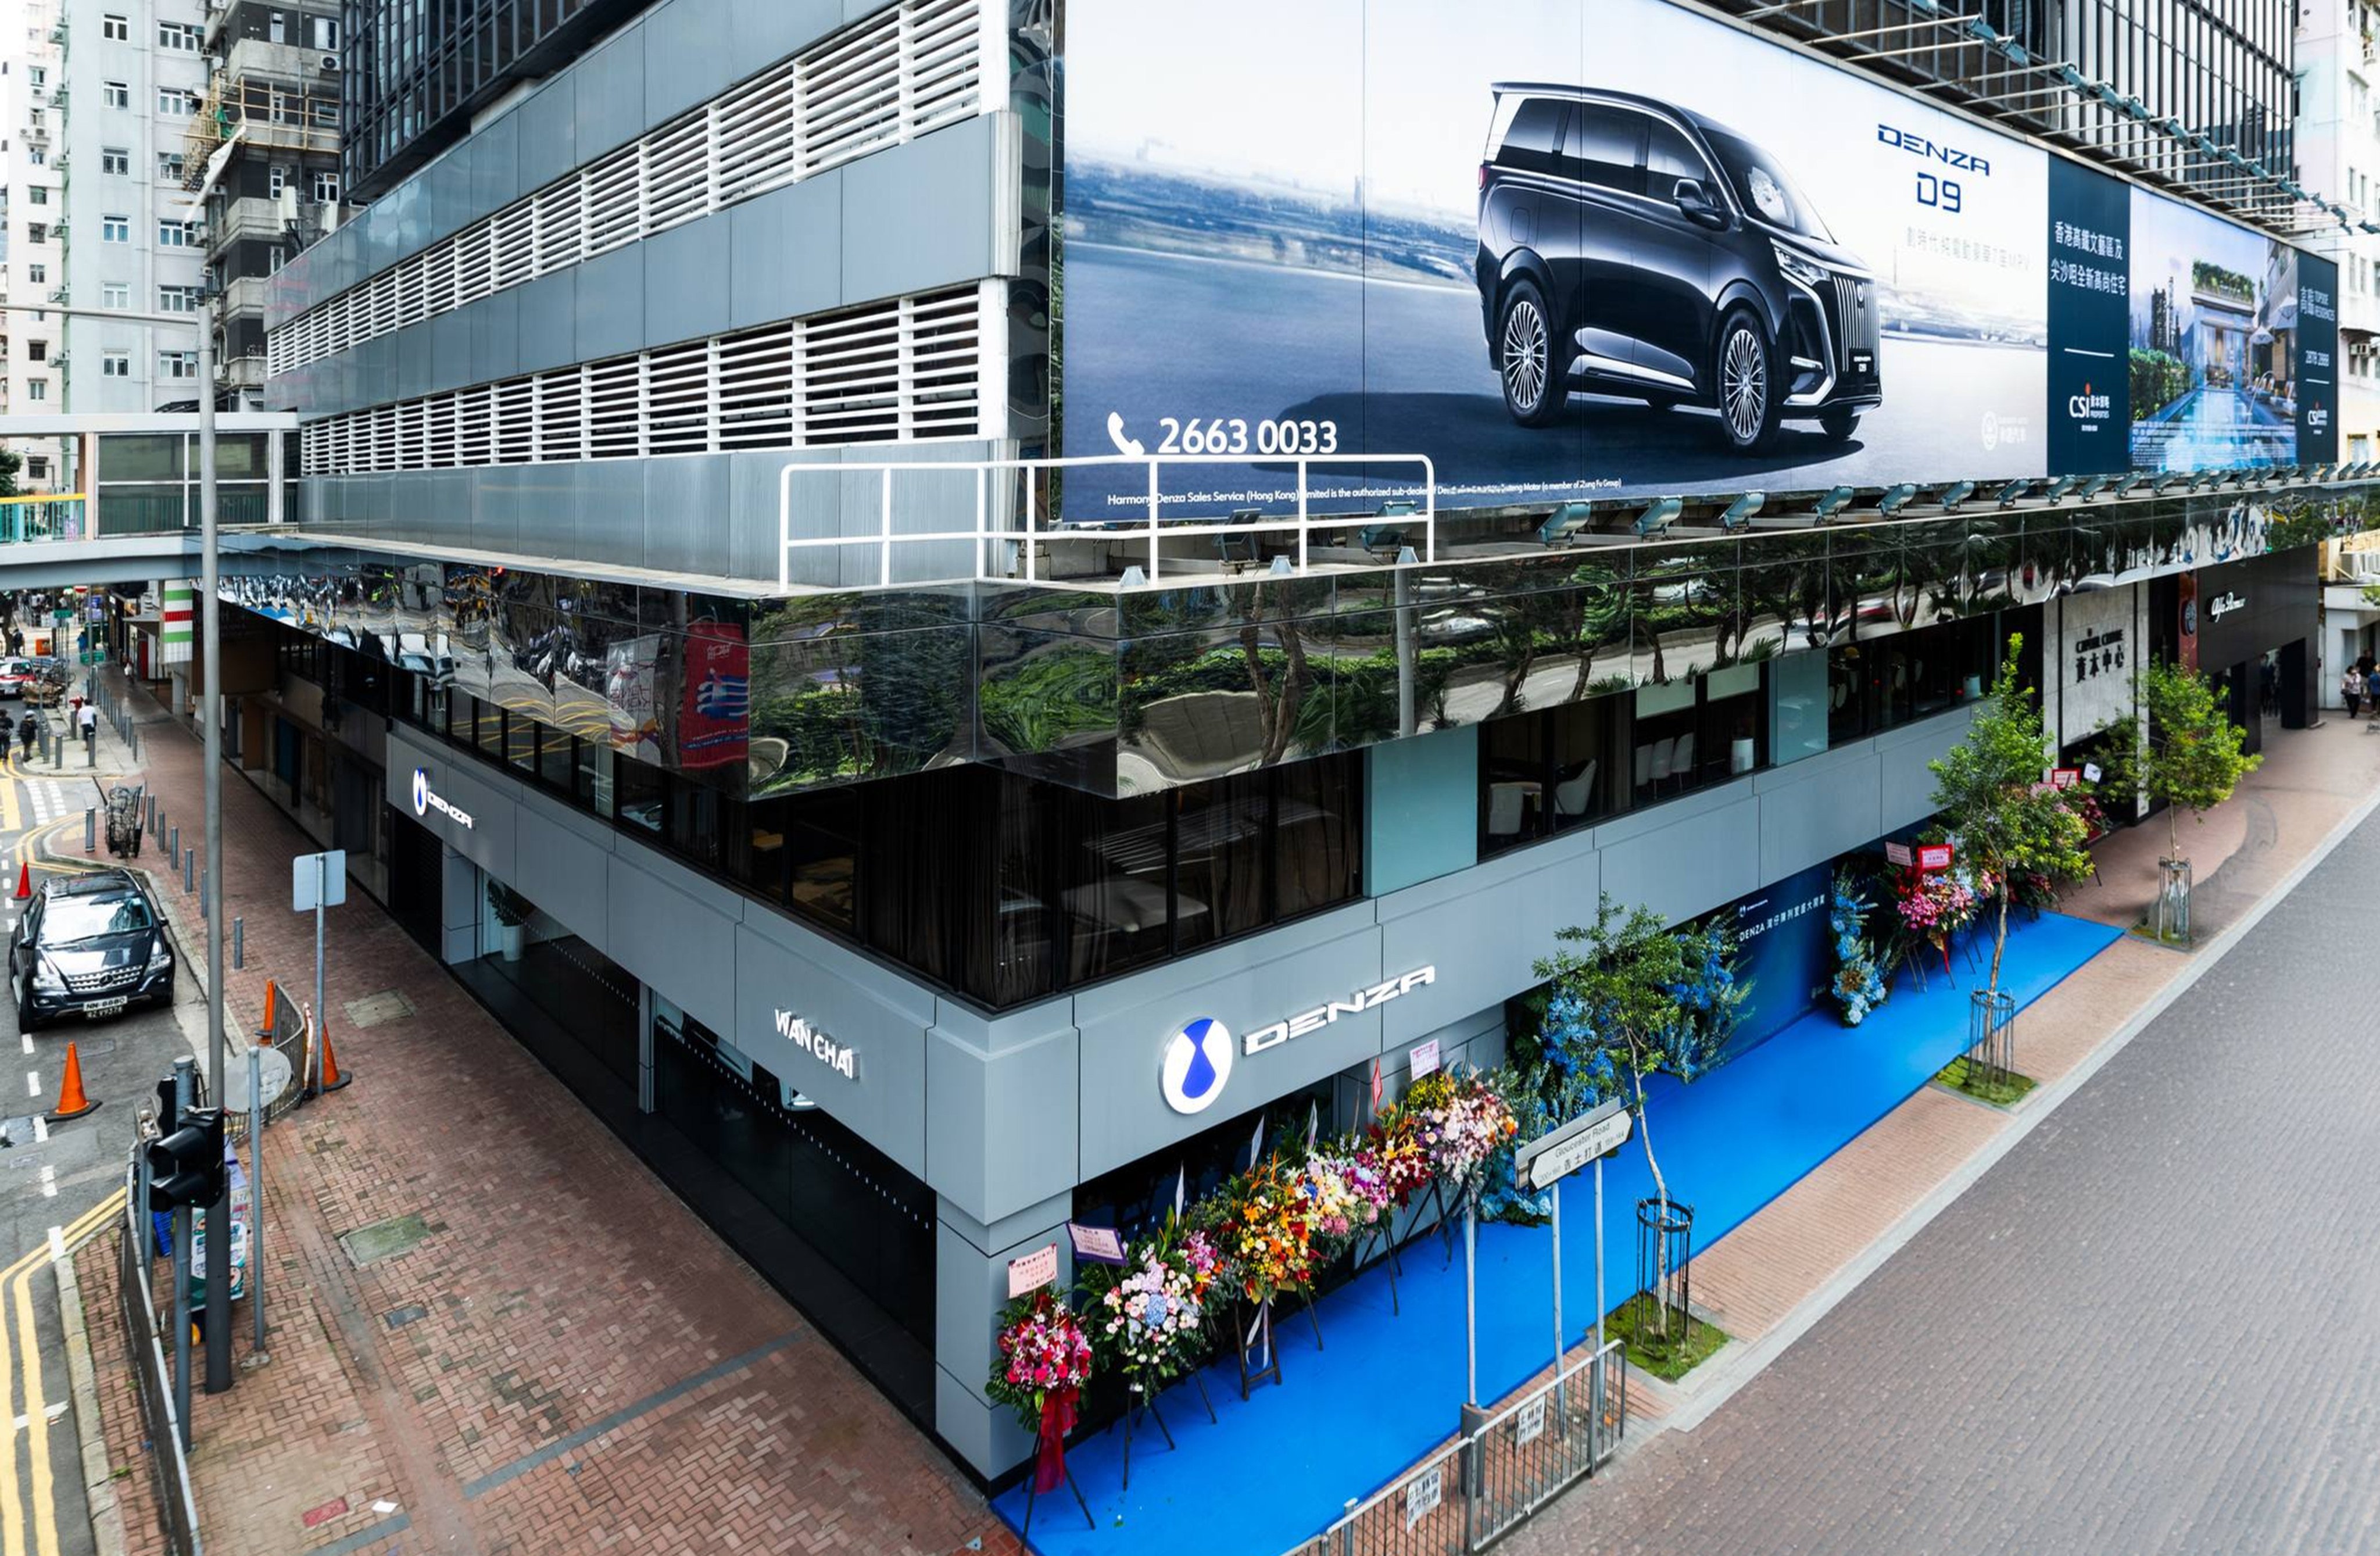 Denza, the luxury EV brand owned by BYD, rented a more than 14,000 square feet showroom in Wan Chai for three years. Photo: Instagram/ BYD